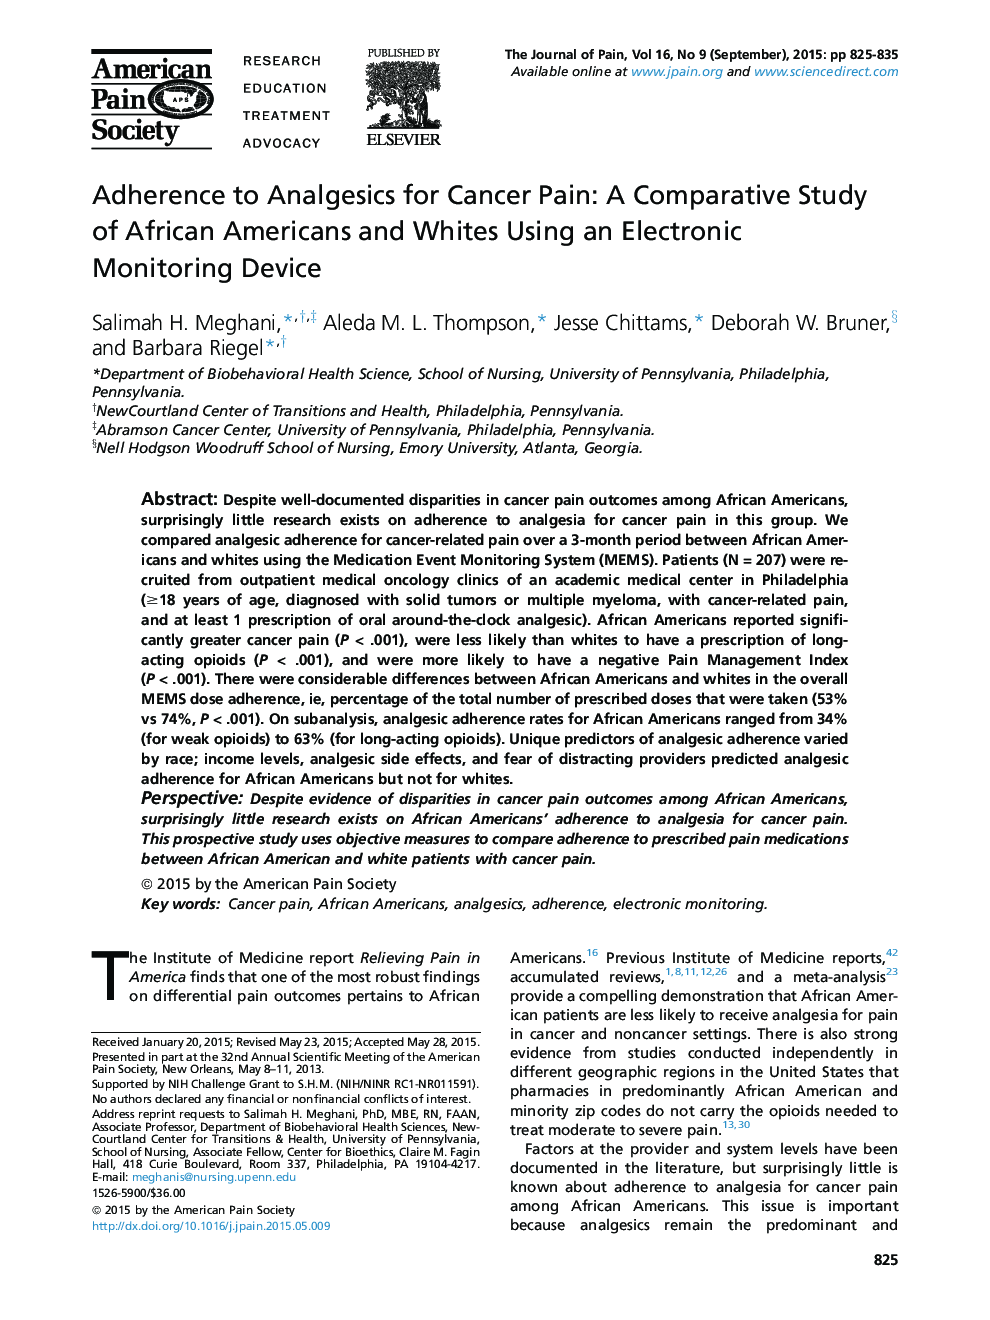 Adherence to Analgesics for Cancer Pain: A Comparative Study of African Americans and Whites Using an Electronic Monitoring Device 